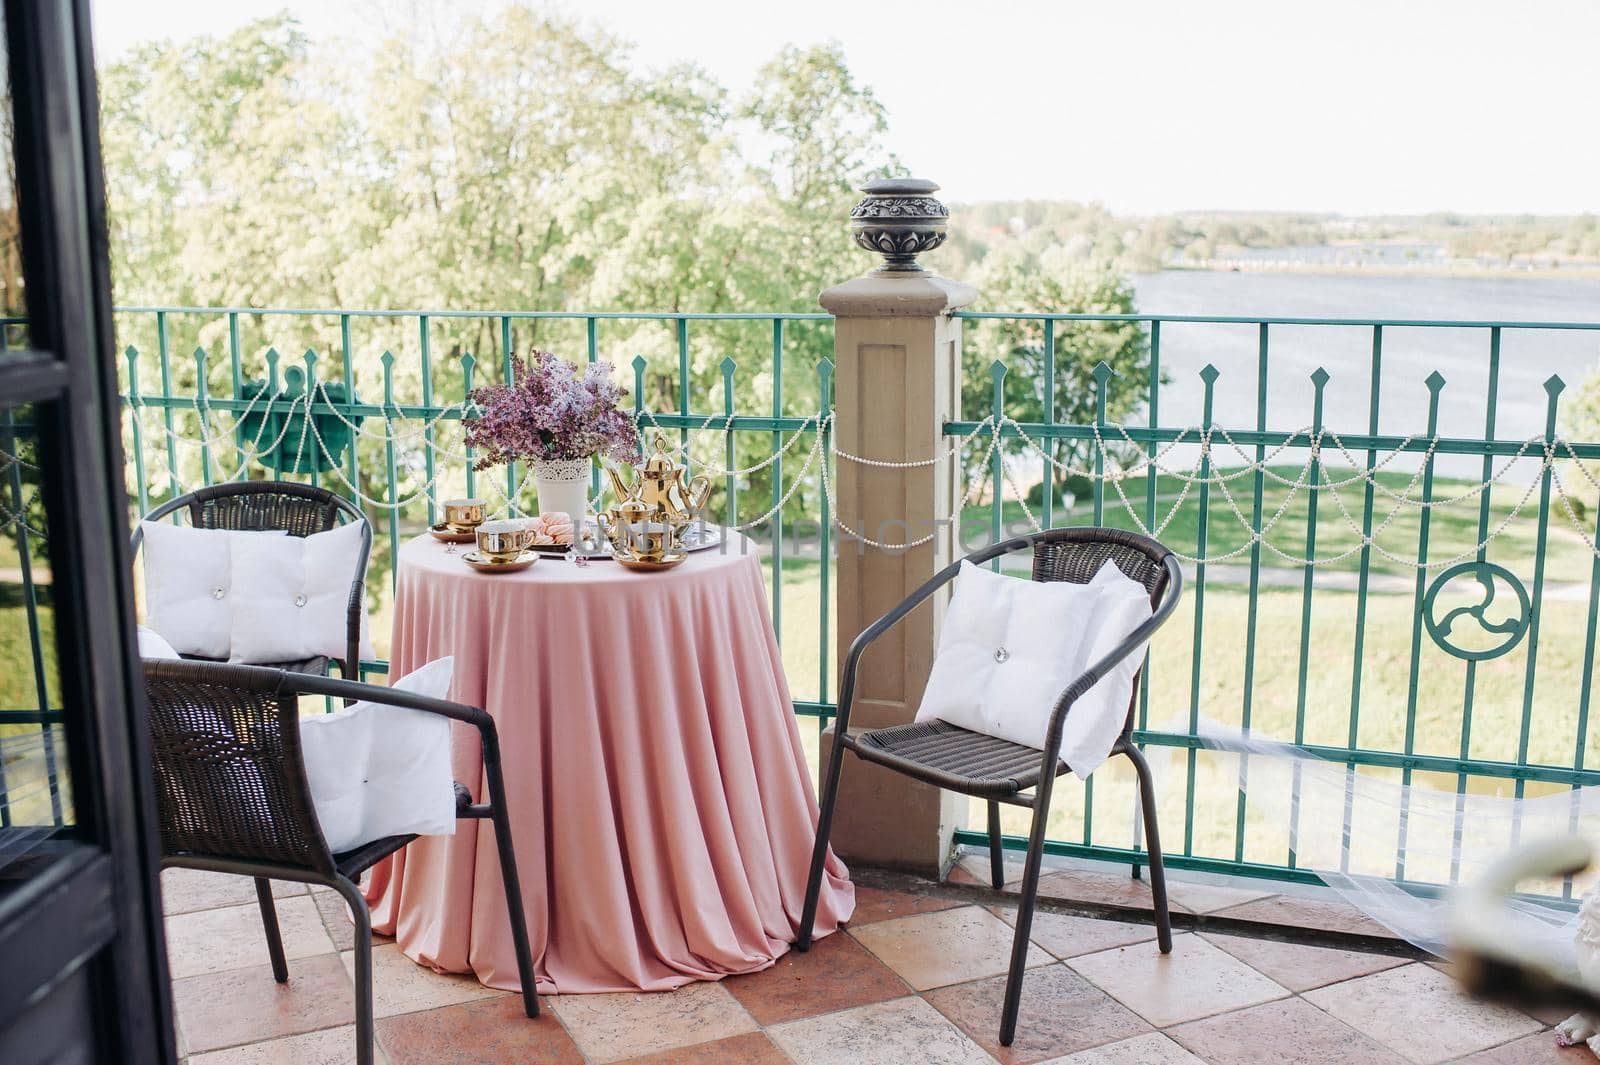 Delicate morning tea table setting with lilac flowers in Nesvizh castle, antique spoons and dishes on the table with a pink tablecloth.